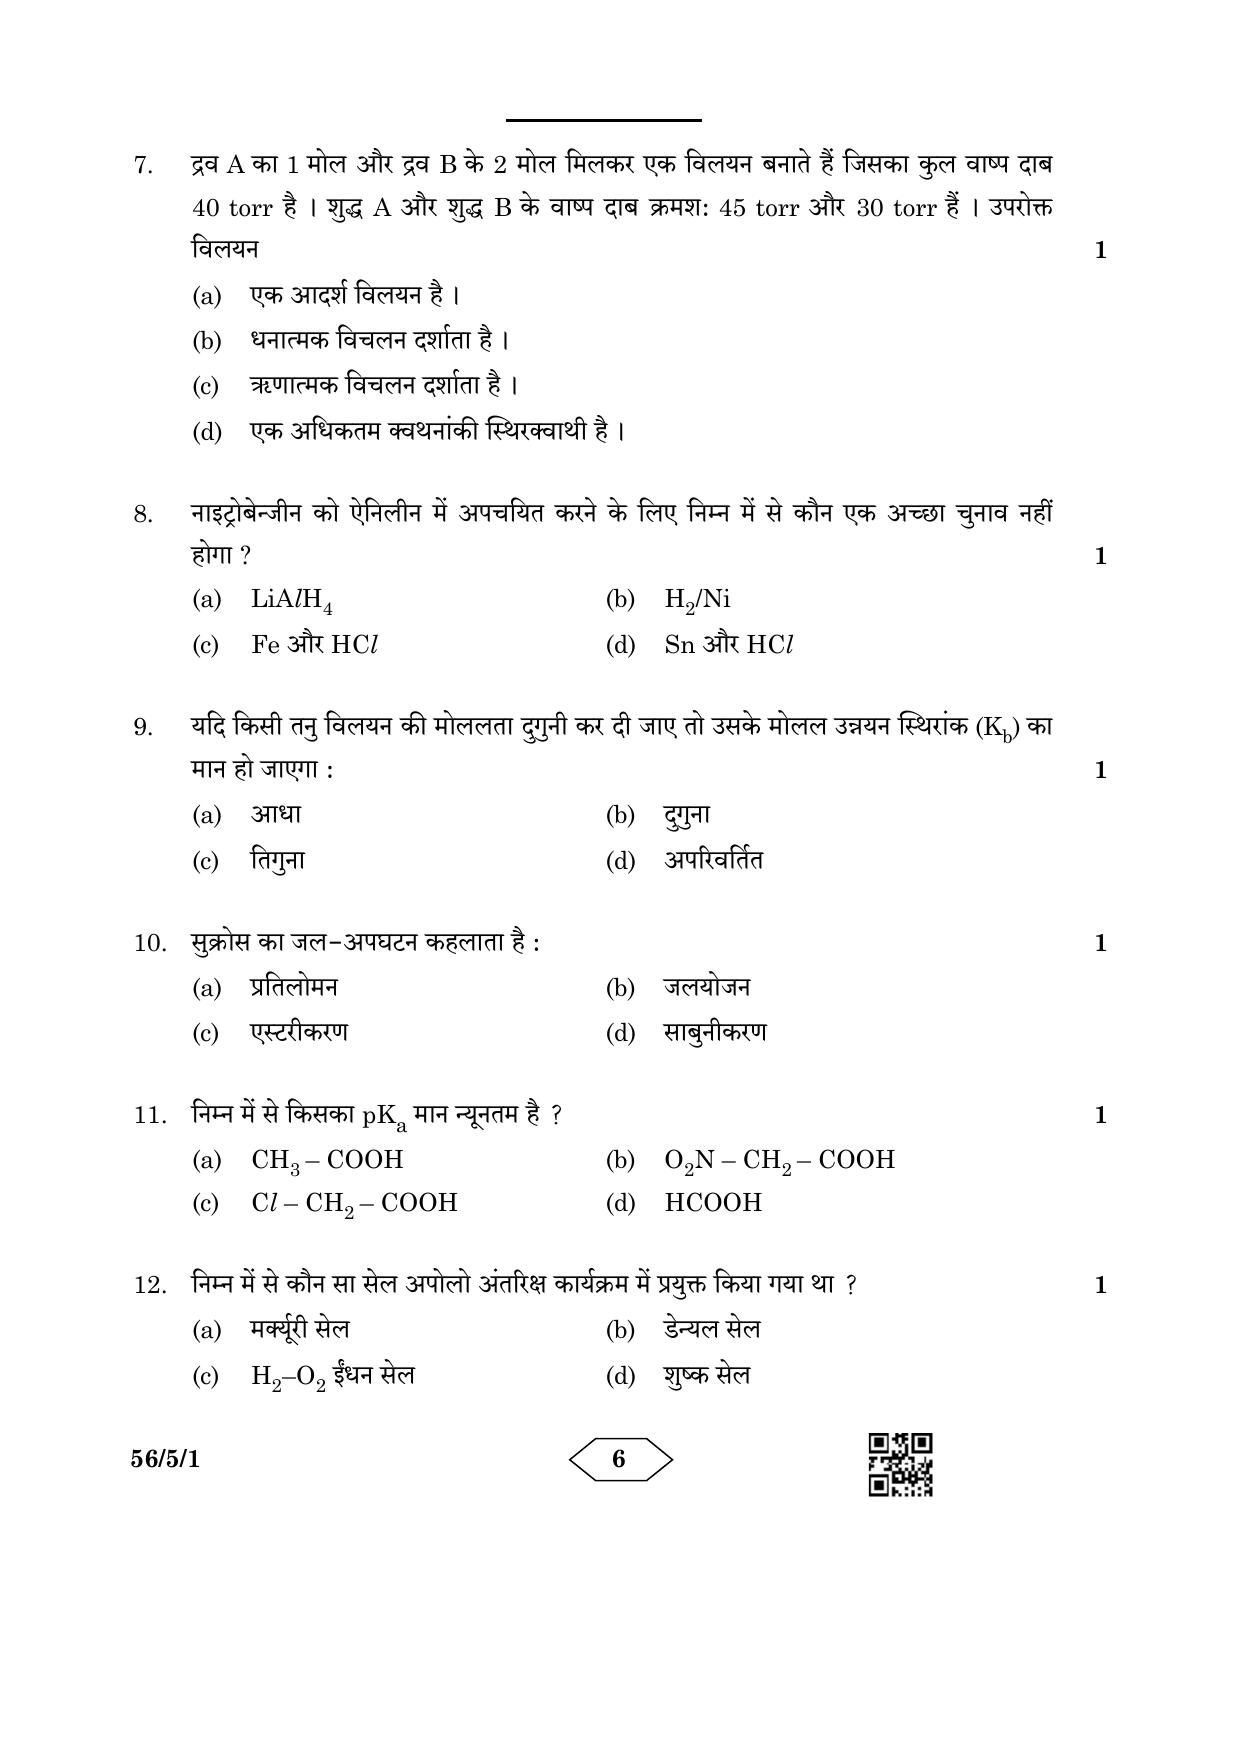 CBSE Class 12 56-5-1 Chemistry 2023 Question Paper - Page 6